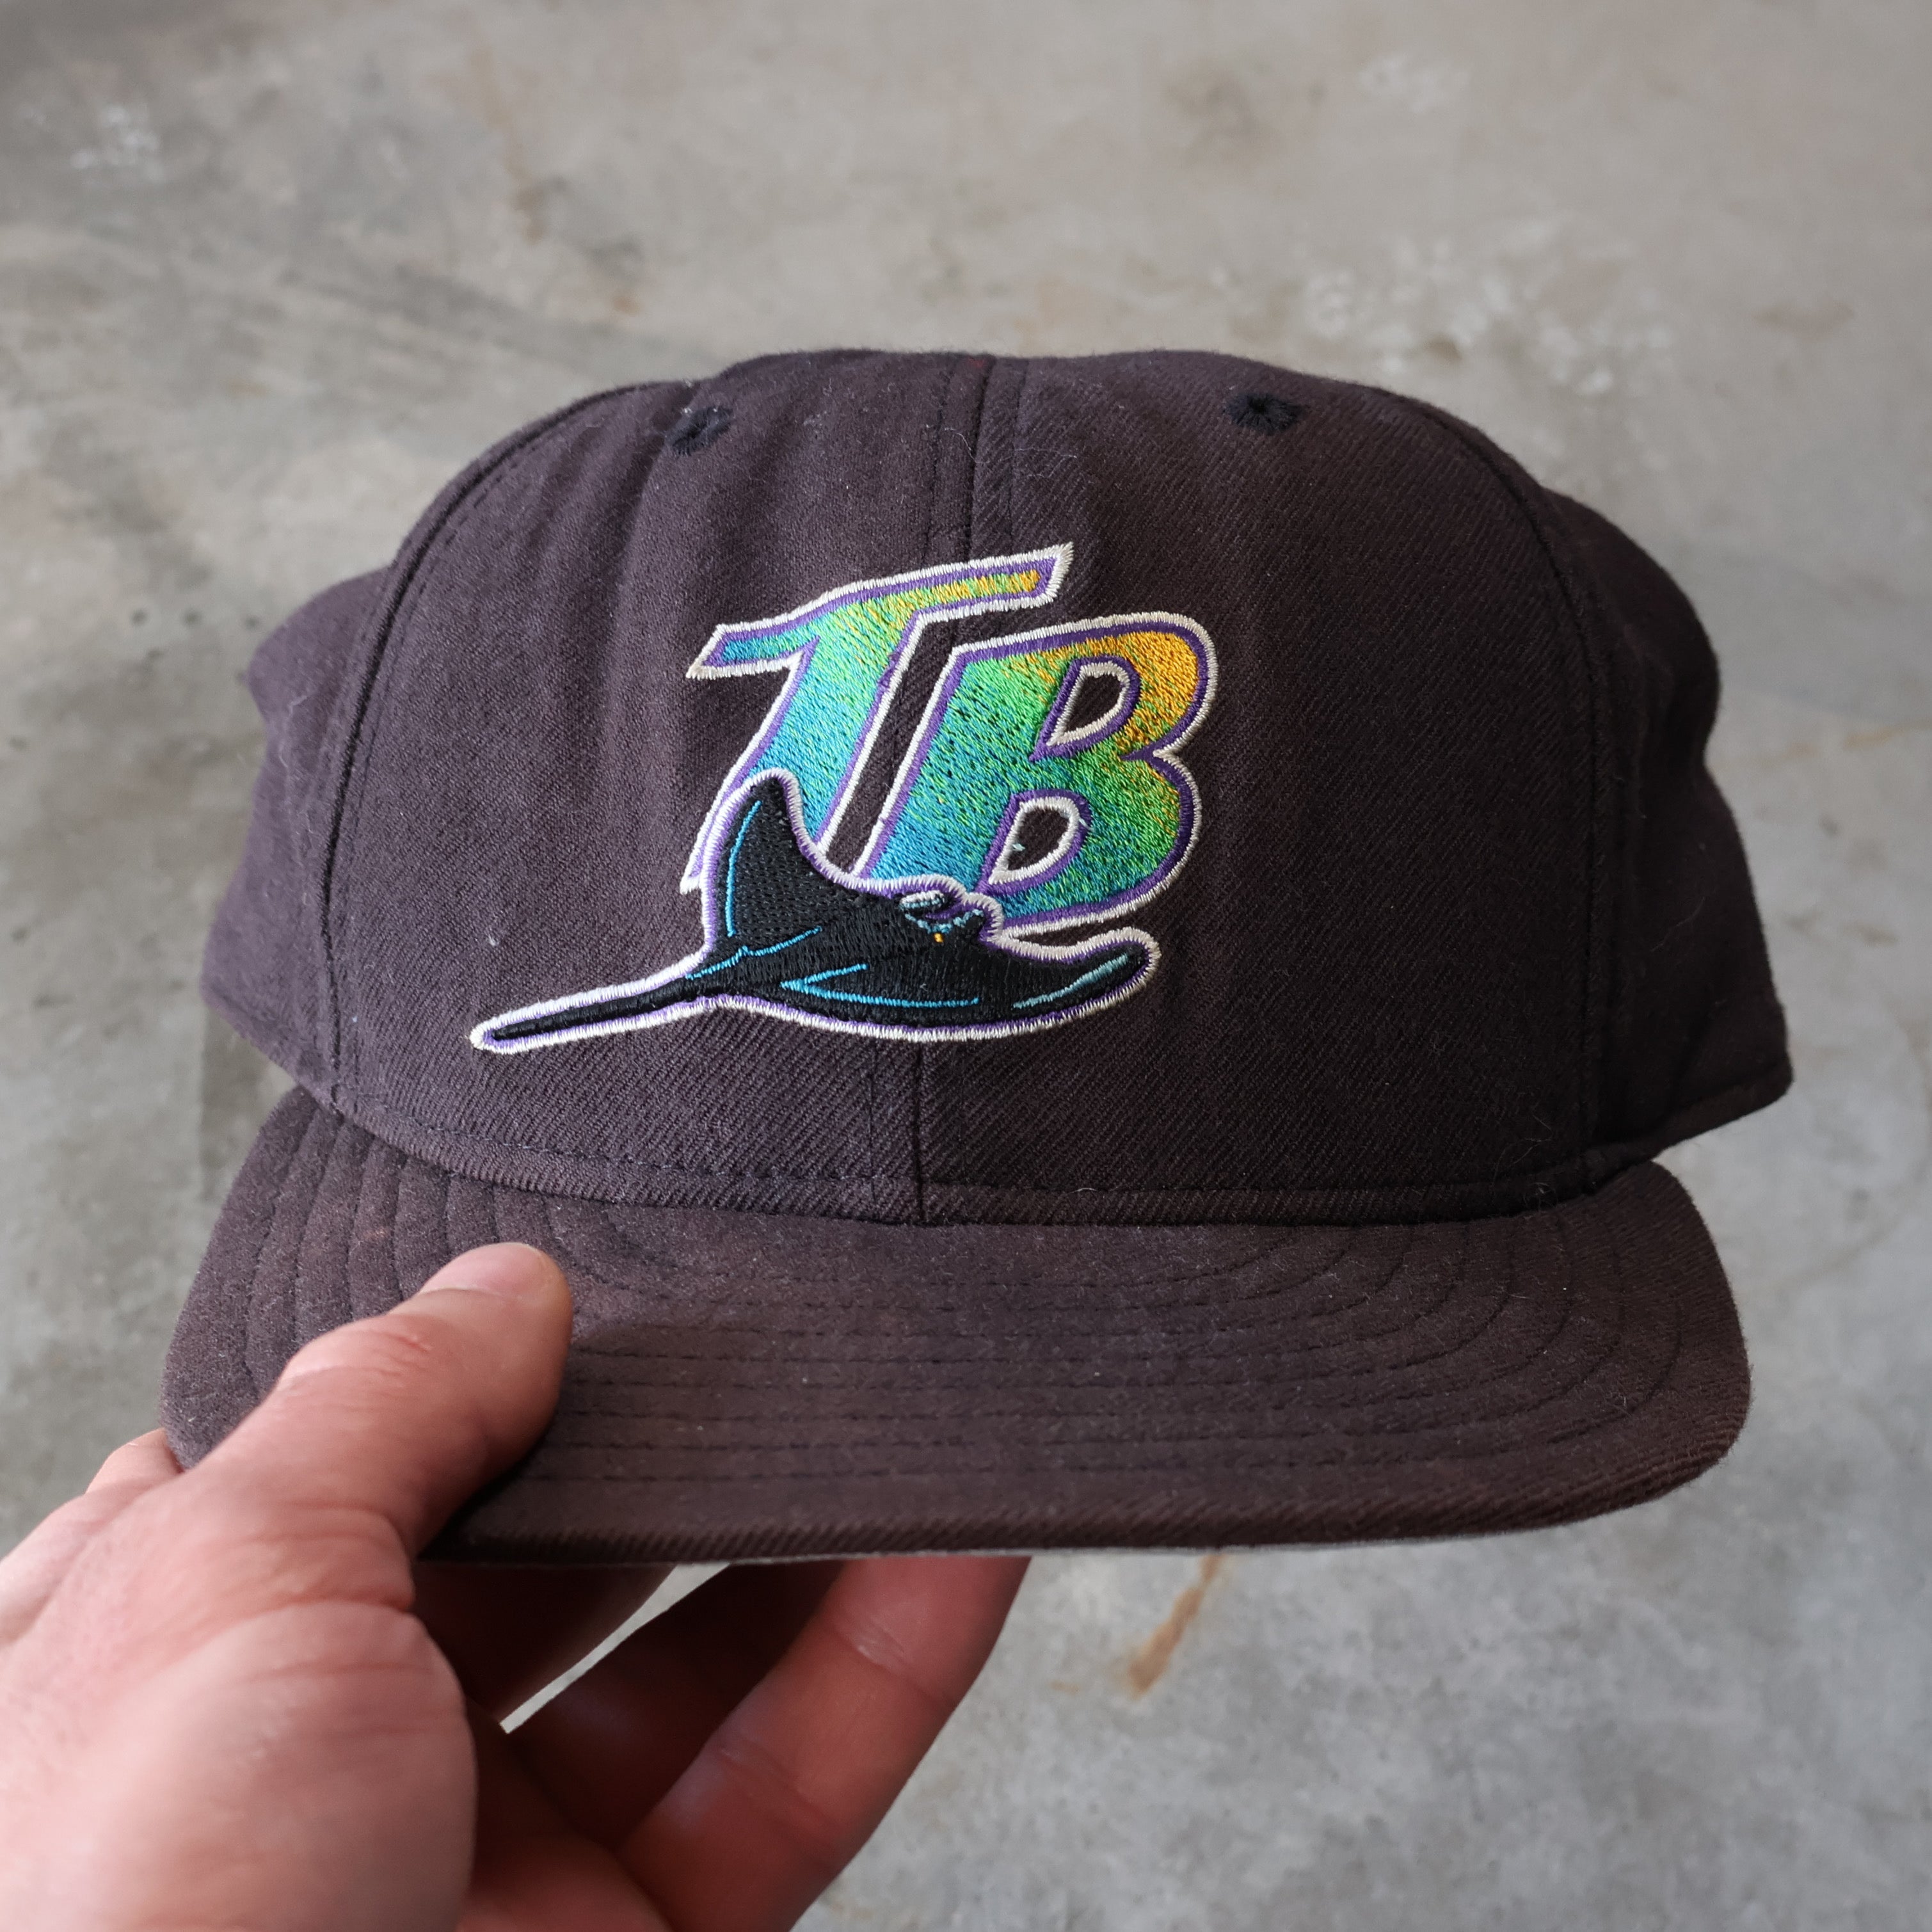 Tampa Bay Rays Fitted Hat 90s (7 3/8)